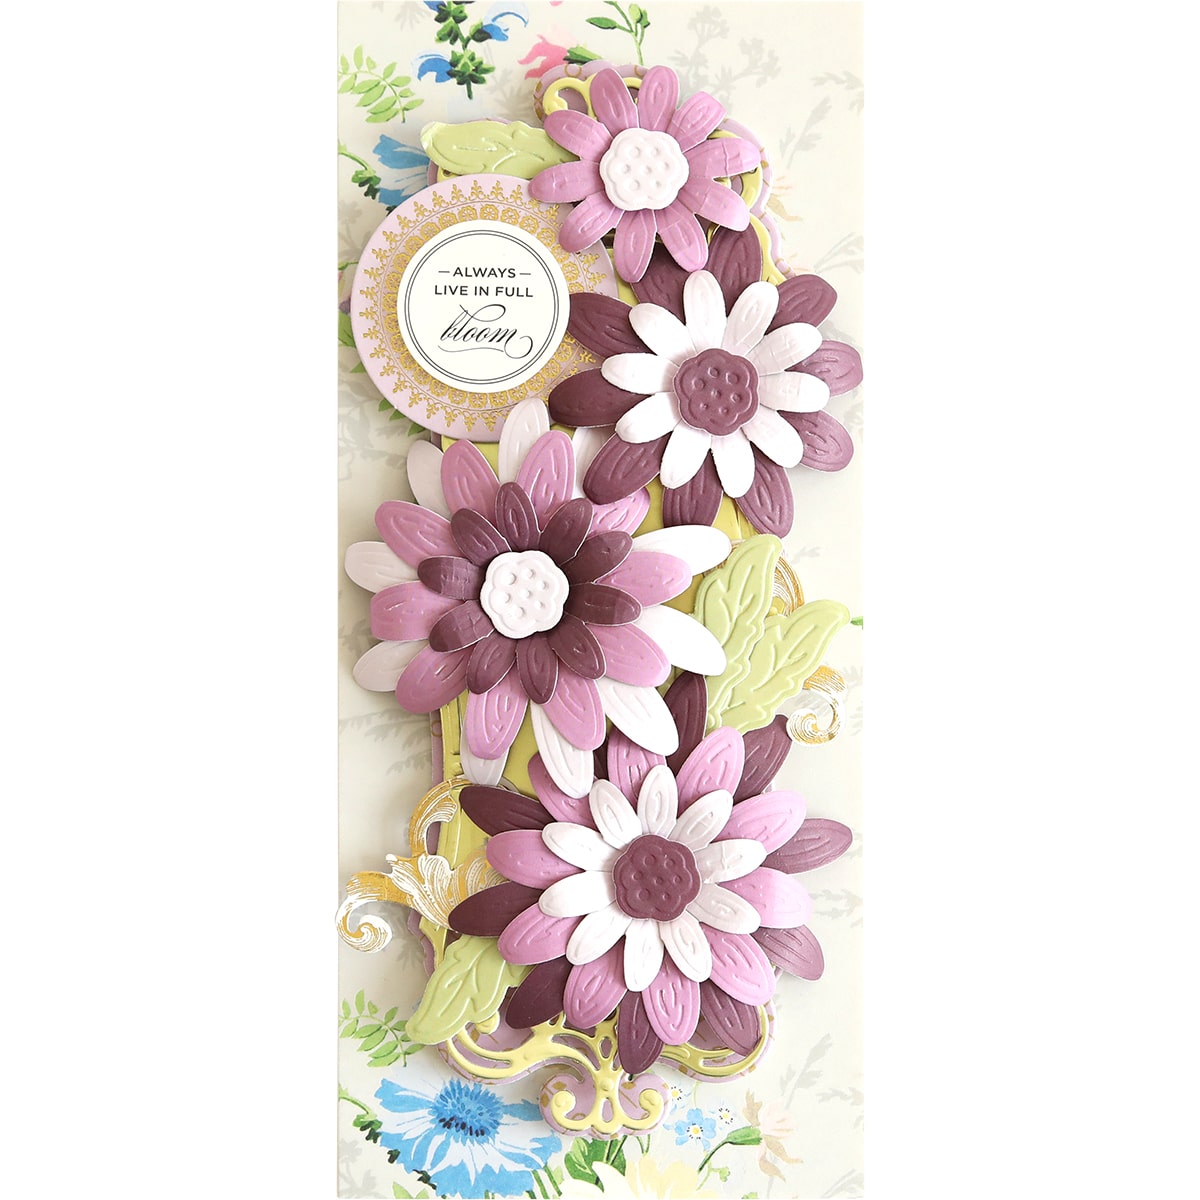 A card with purple and white flowers on it.